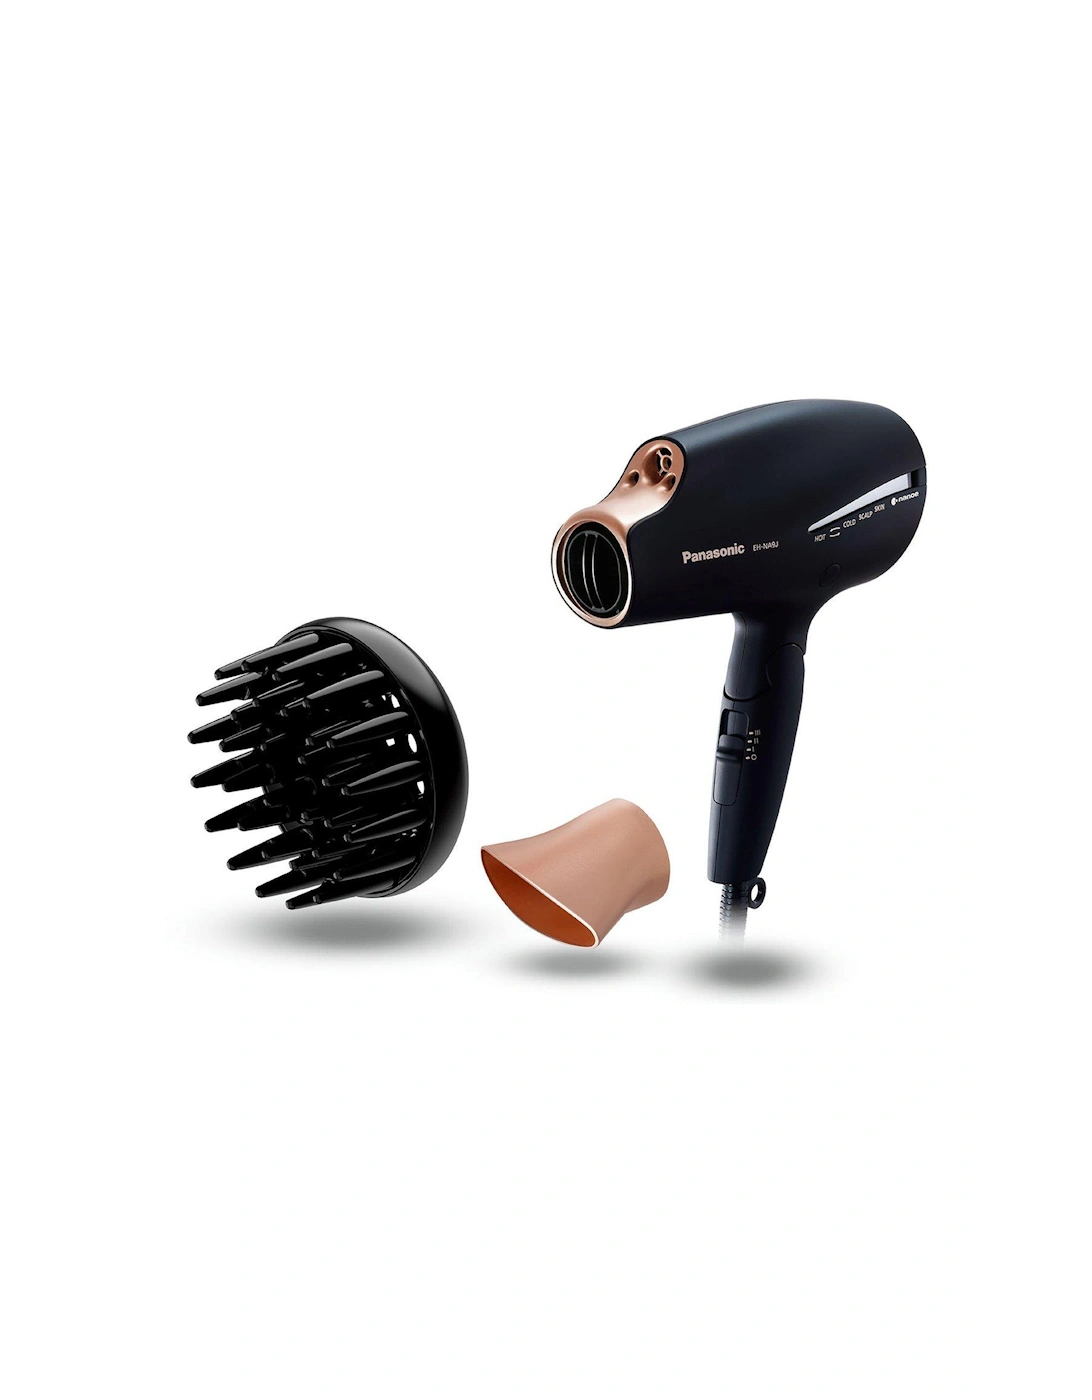 EH-NA9J Advanced Folding Hair Dryer with Diffuser, Nanoe & Double Mineral Technology - Reduces Damage and Split Ends, 2 of 1